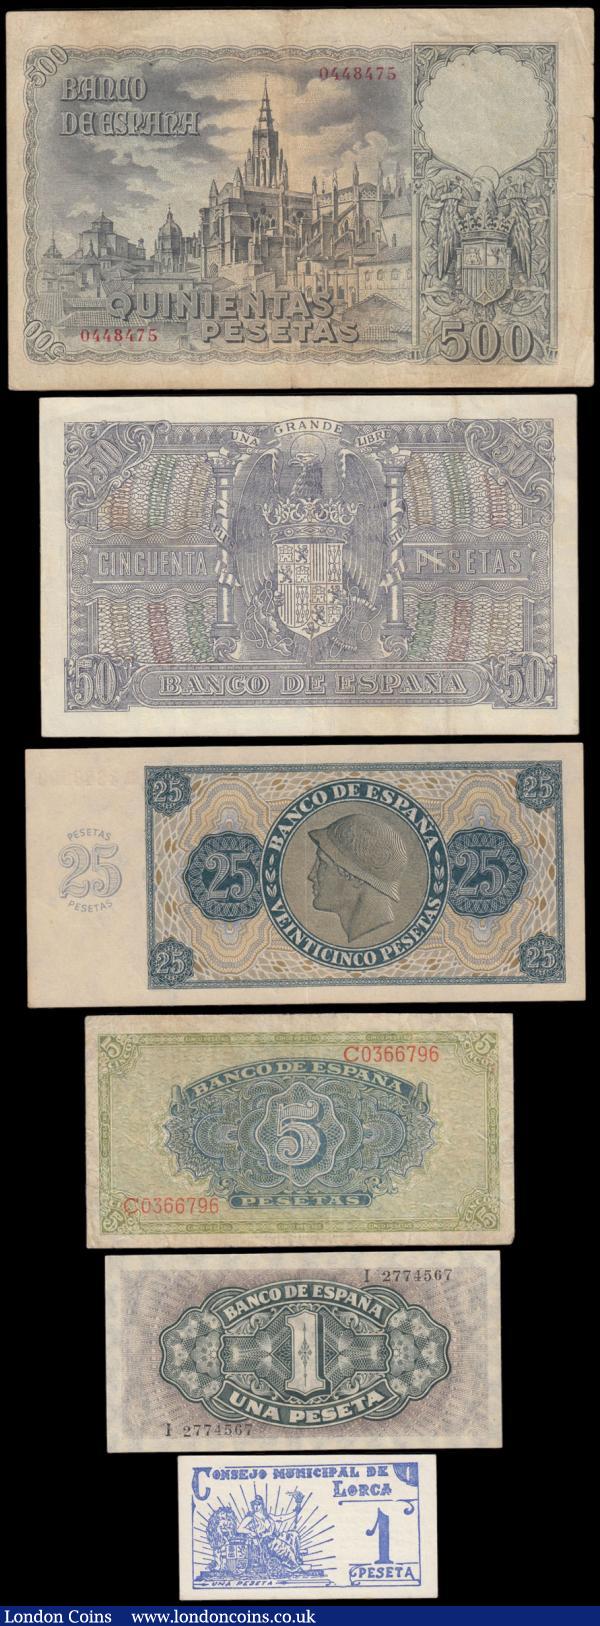 Spain (6) in mixed grades comprising 500 Pesetas Pick 124a dated 21st October 1940 serial number 04448475, 50 Pesetas Pick 117a dated 9th January 1940 serial number D51430602, 25 Pesetas Pick 99a dated 21st November 1936 serial number R4948590, Local Provisional issue 1 Peseta Consejo Municipal de Lorca, 5 Pesetas Pick 123a dated 4th September 1940 serial number C0366796 and  1 Peseta Pick 122a dated 4th September 1940 serial number I 2774567 and very Scarce issues : World Banknotes : Auction 166 : Lot 423